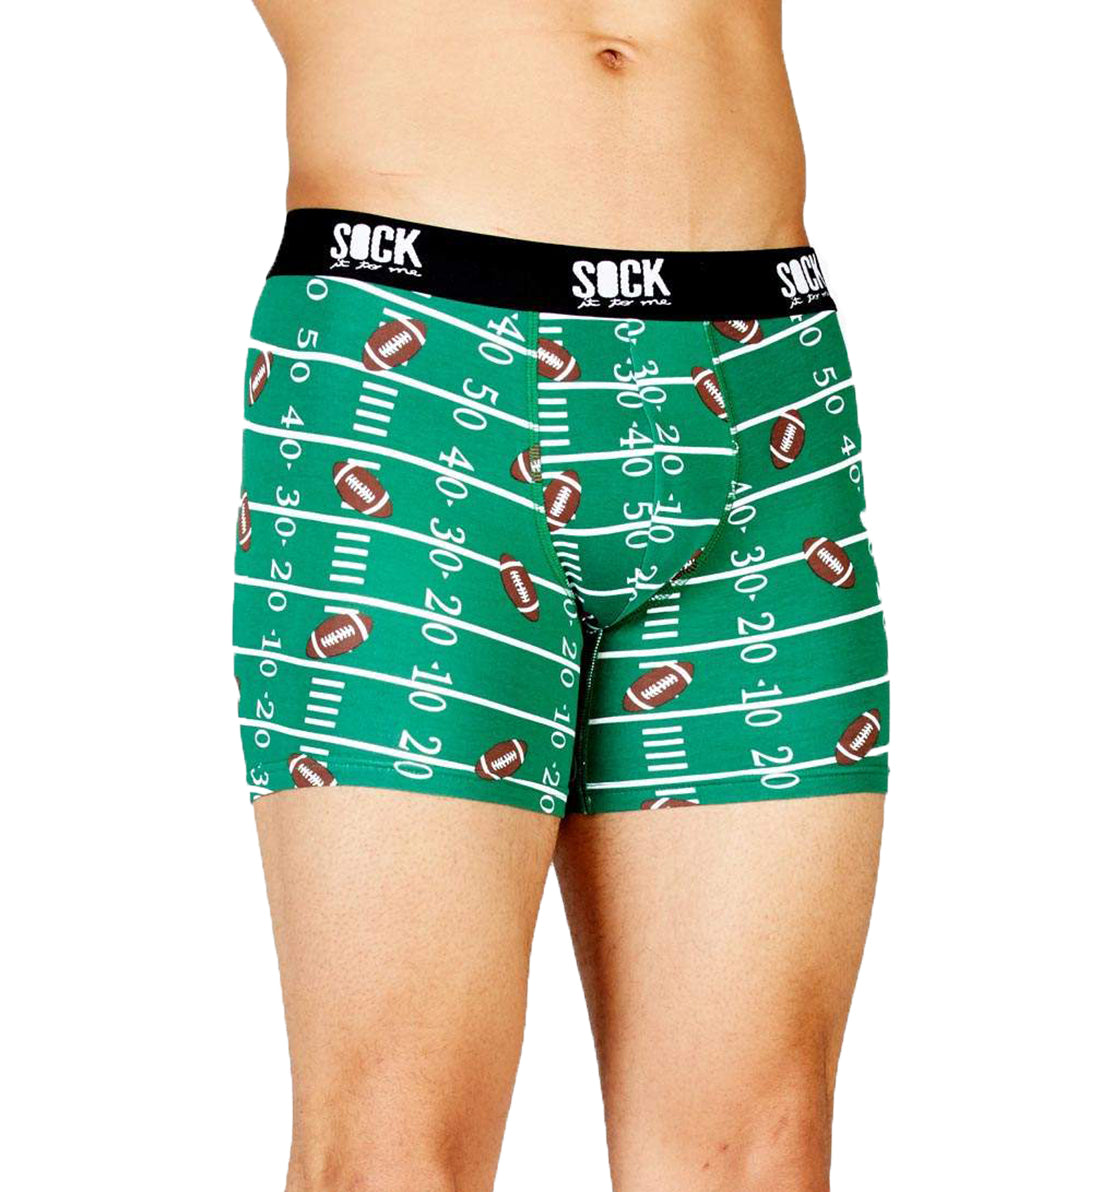 SOCK it to me Men&#39;s Boxer Brief (umb036),Small,Touchdown - Touchdown,Small